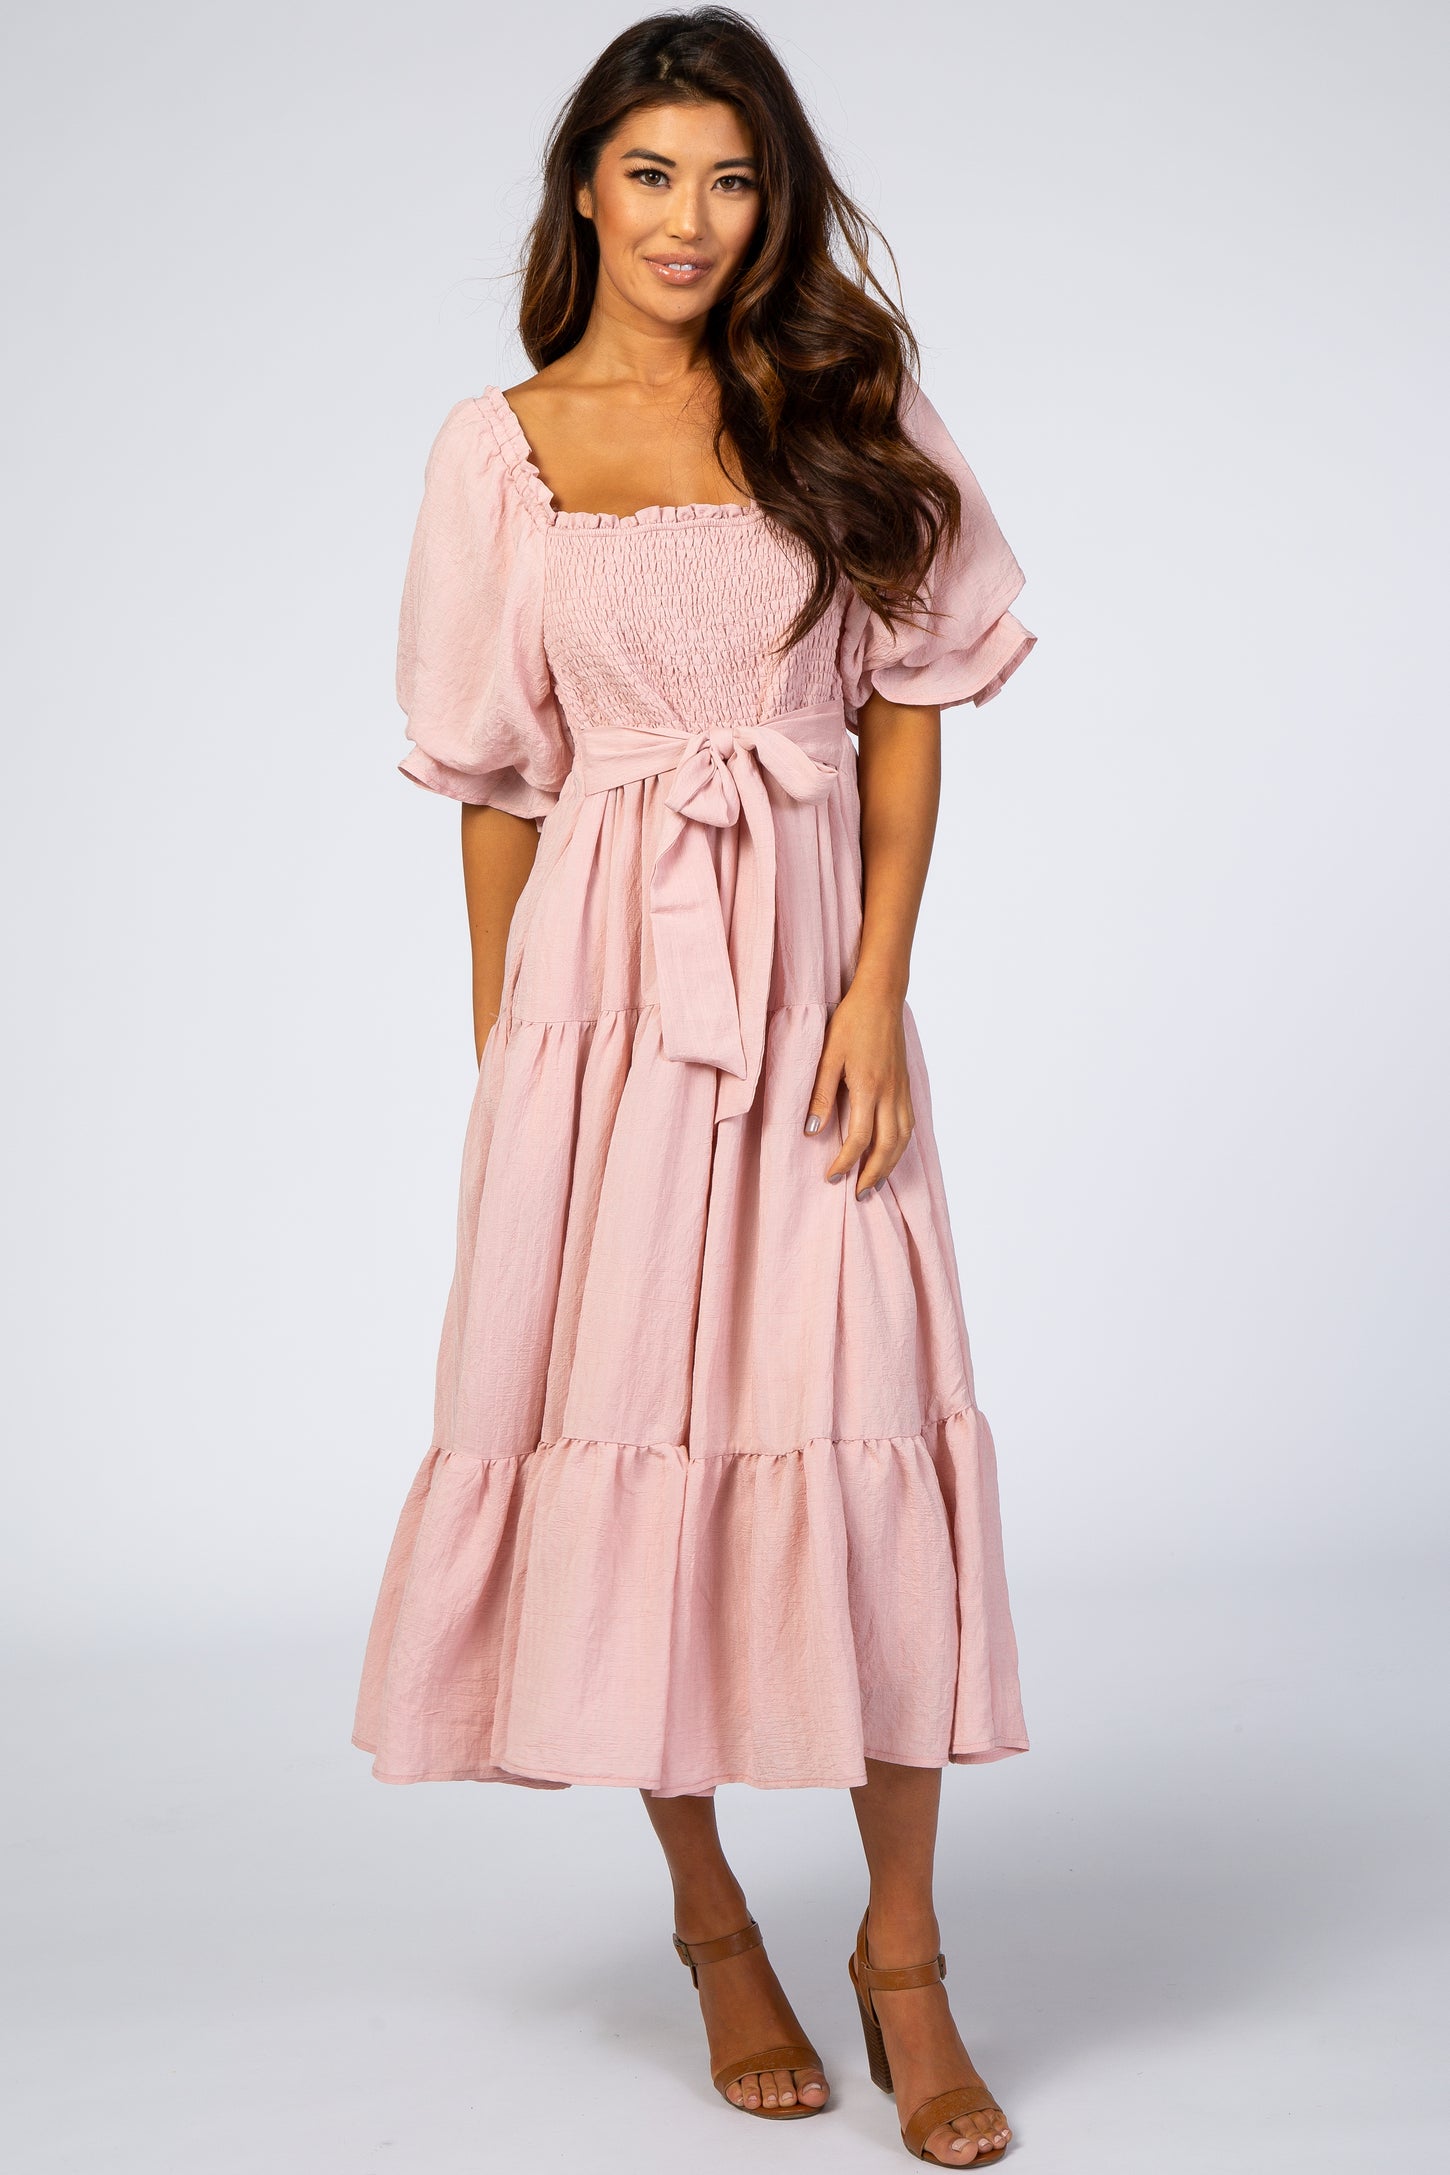 Pink Smocked Tiered Maternity Dress